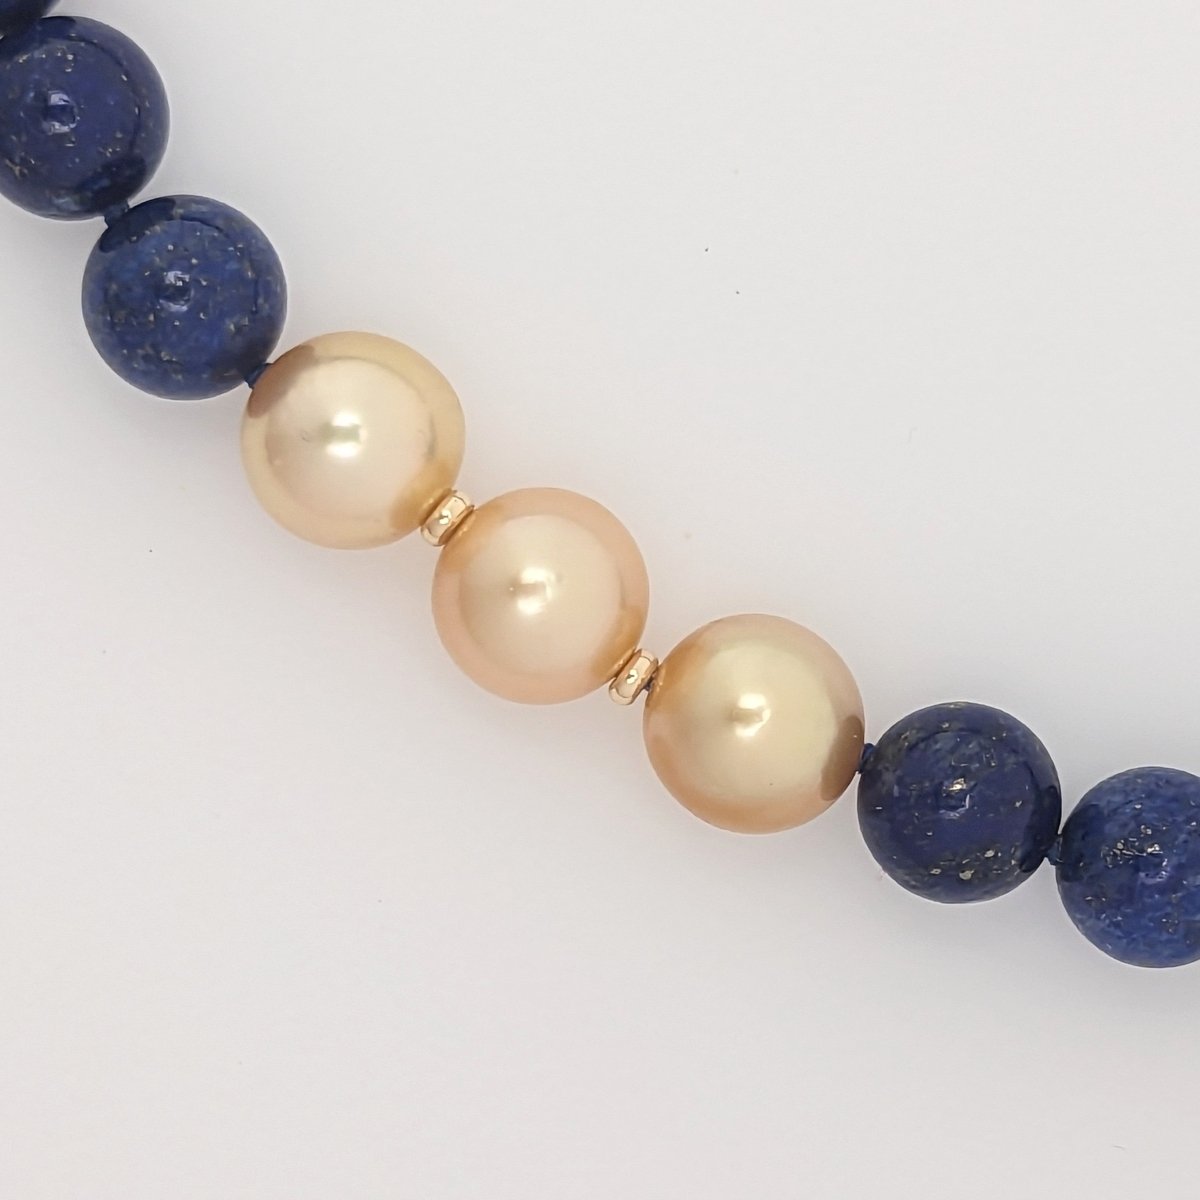 11-12mm Golden South Sea Pearl and Lapis Lazuli Necklace - Marina Korneev Fine Pearls